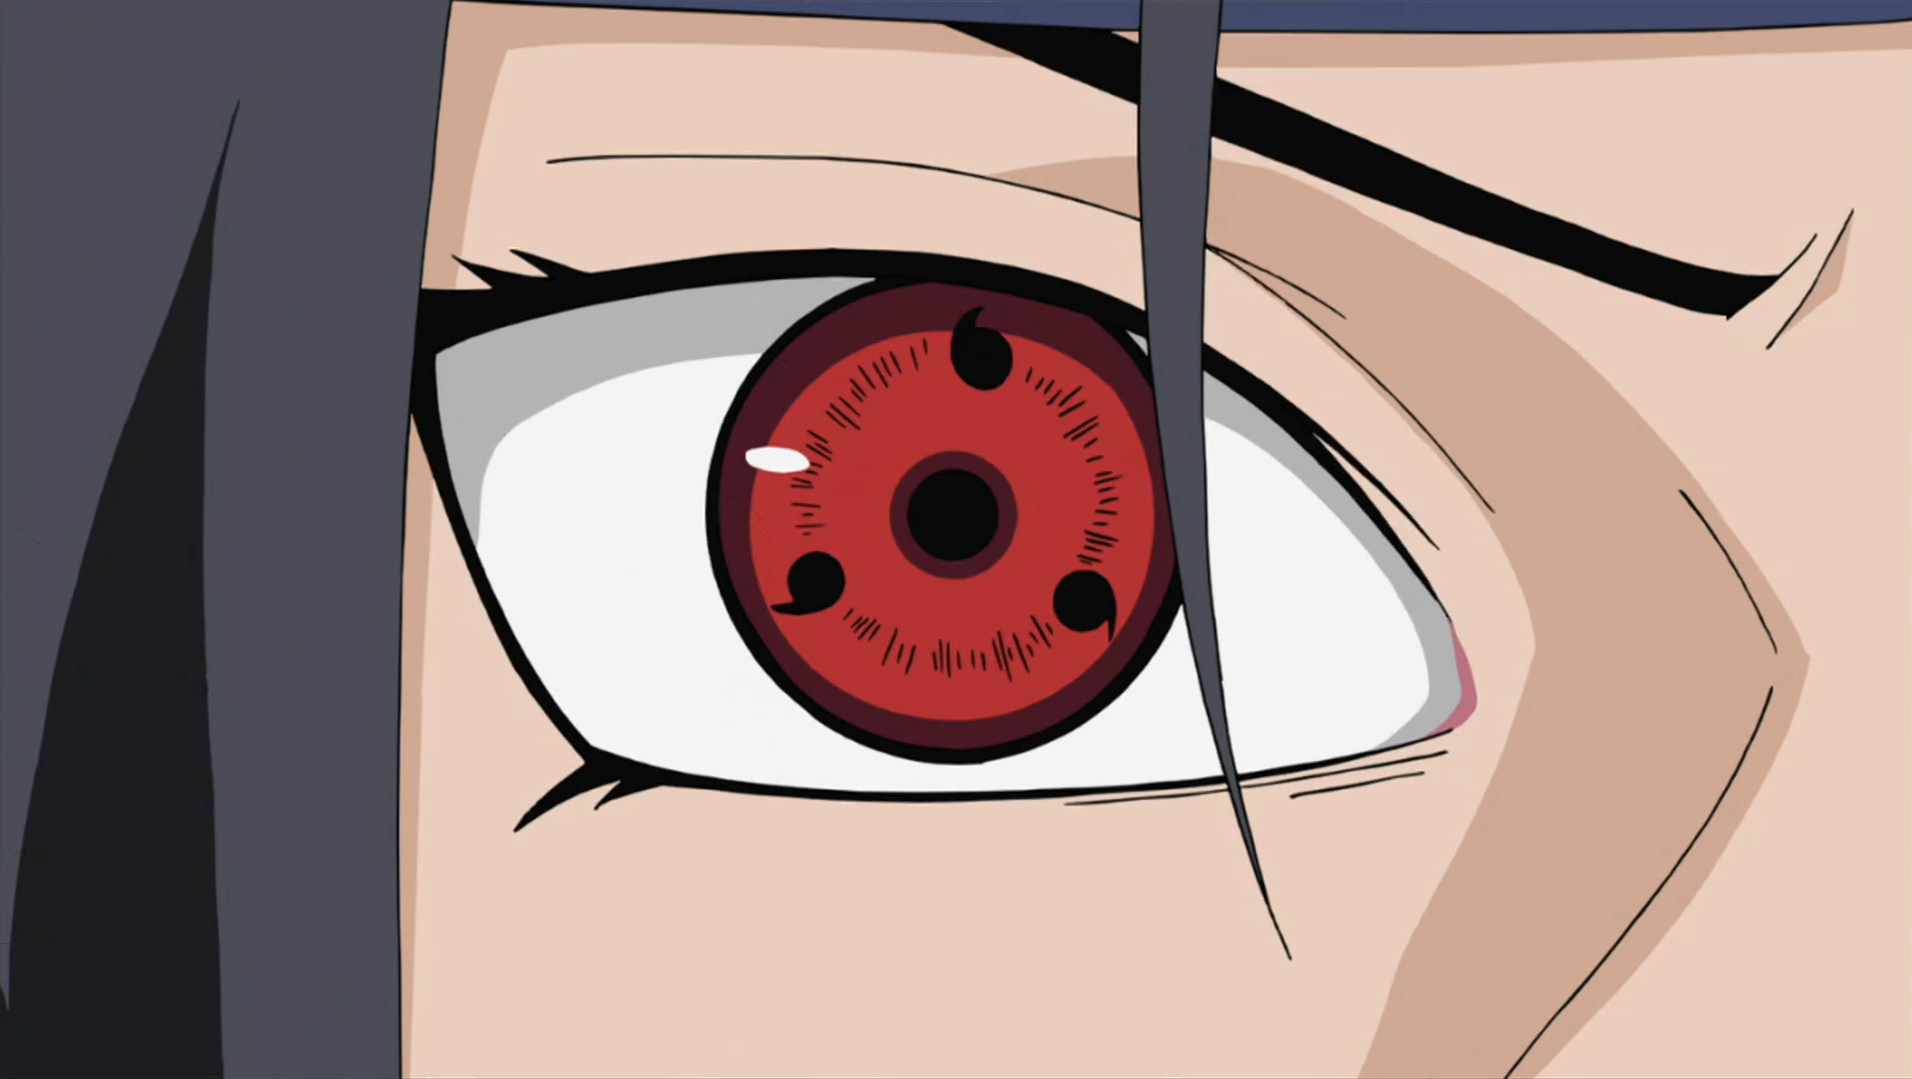 When You Look In This Eyes The Image By Madara Uchiha - roblox madara avatar